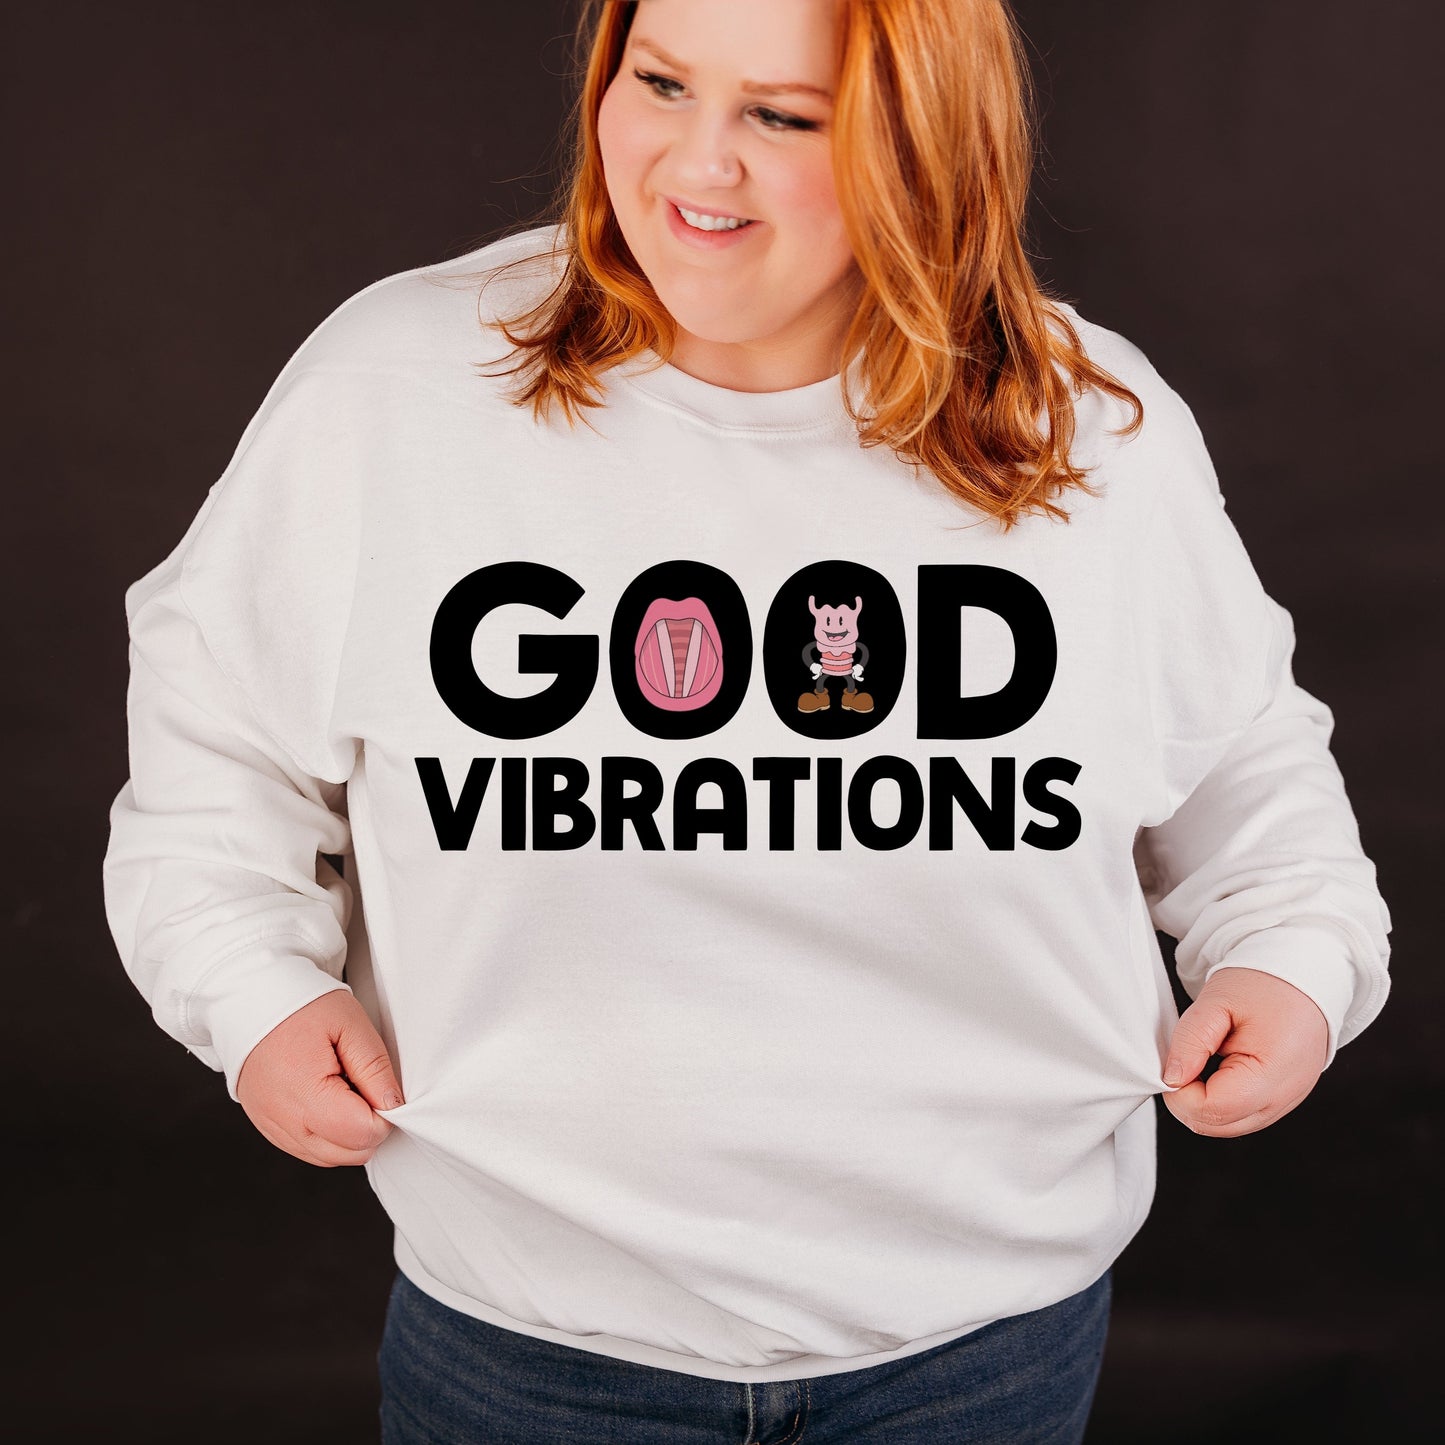 Load image into Gallery viewer, Good Vibrations Crewneck
